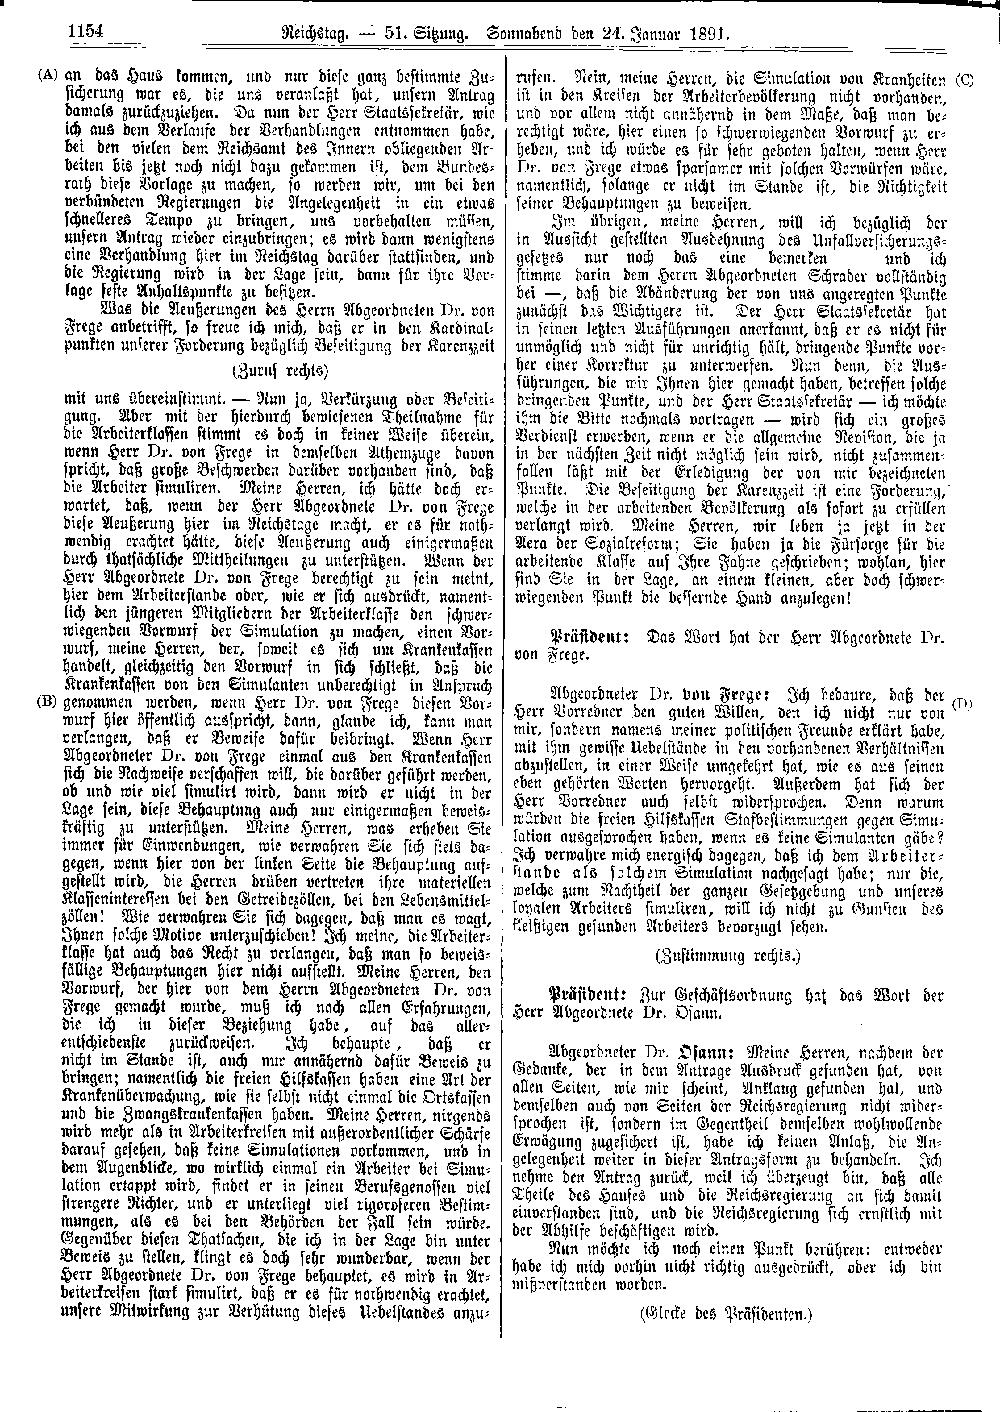 Scan of page 1154